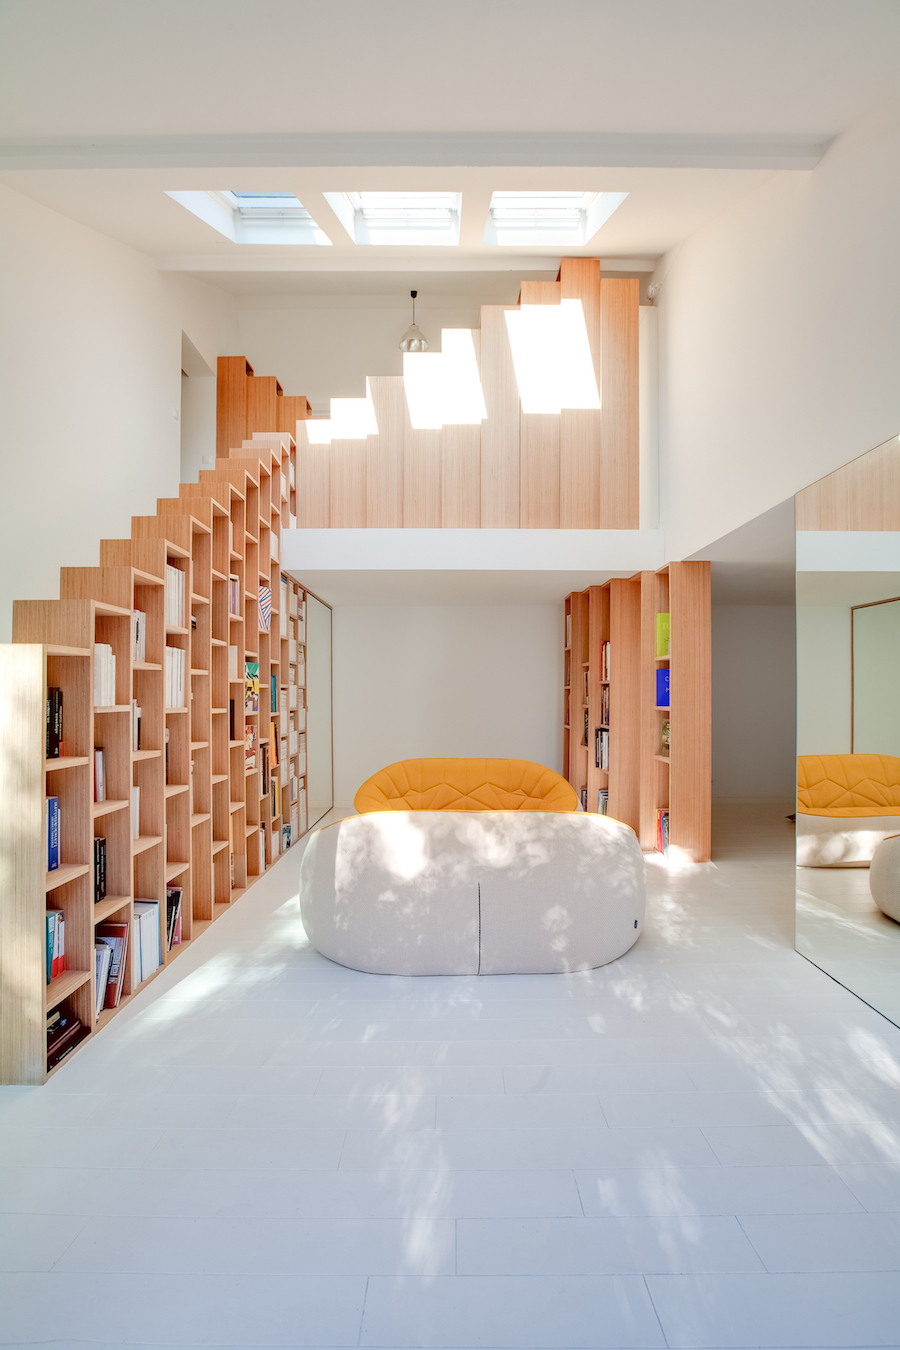 A Stunning, Bright Home in Paris by Andrea Mosca with a staircase bookshelf